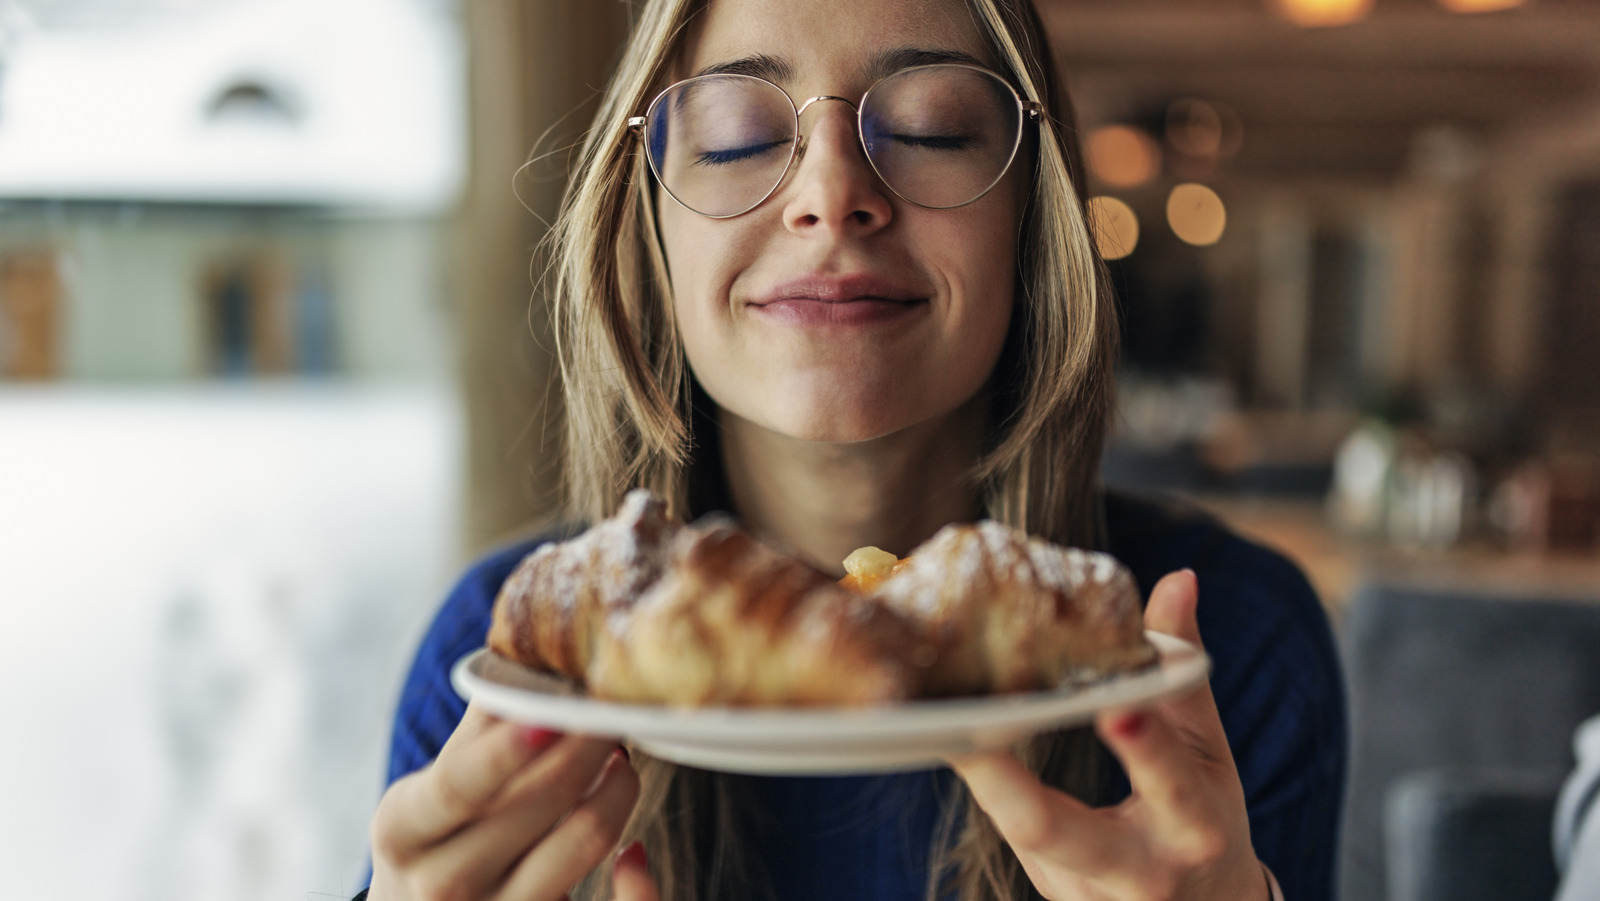 The 3 Worst Eating Habits For Your Brain Health, According To Our Expert - Health Digest